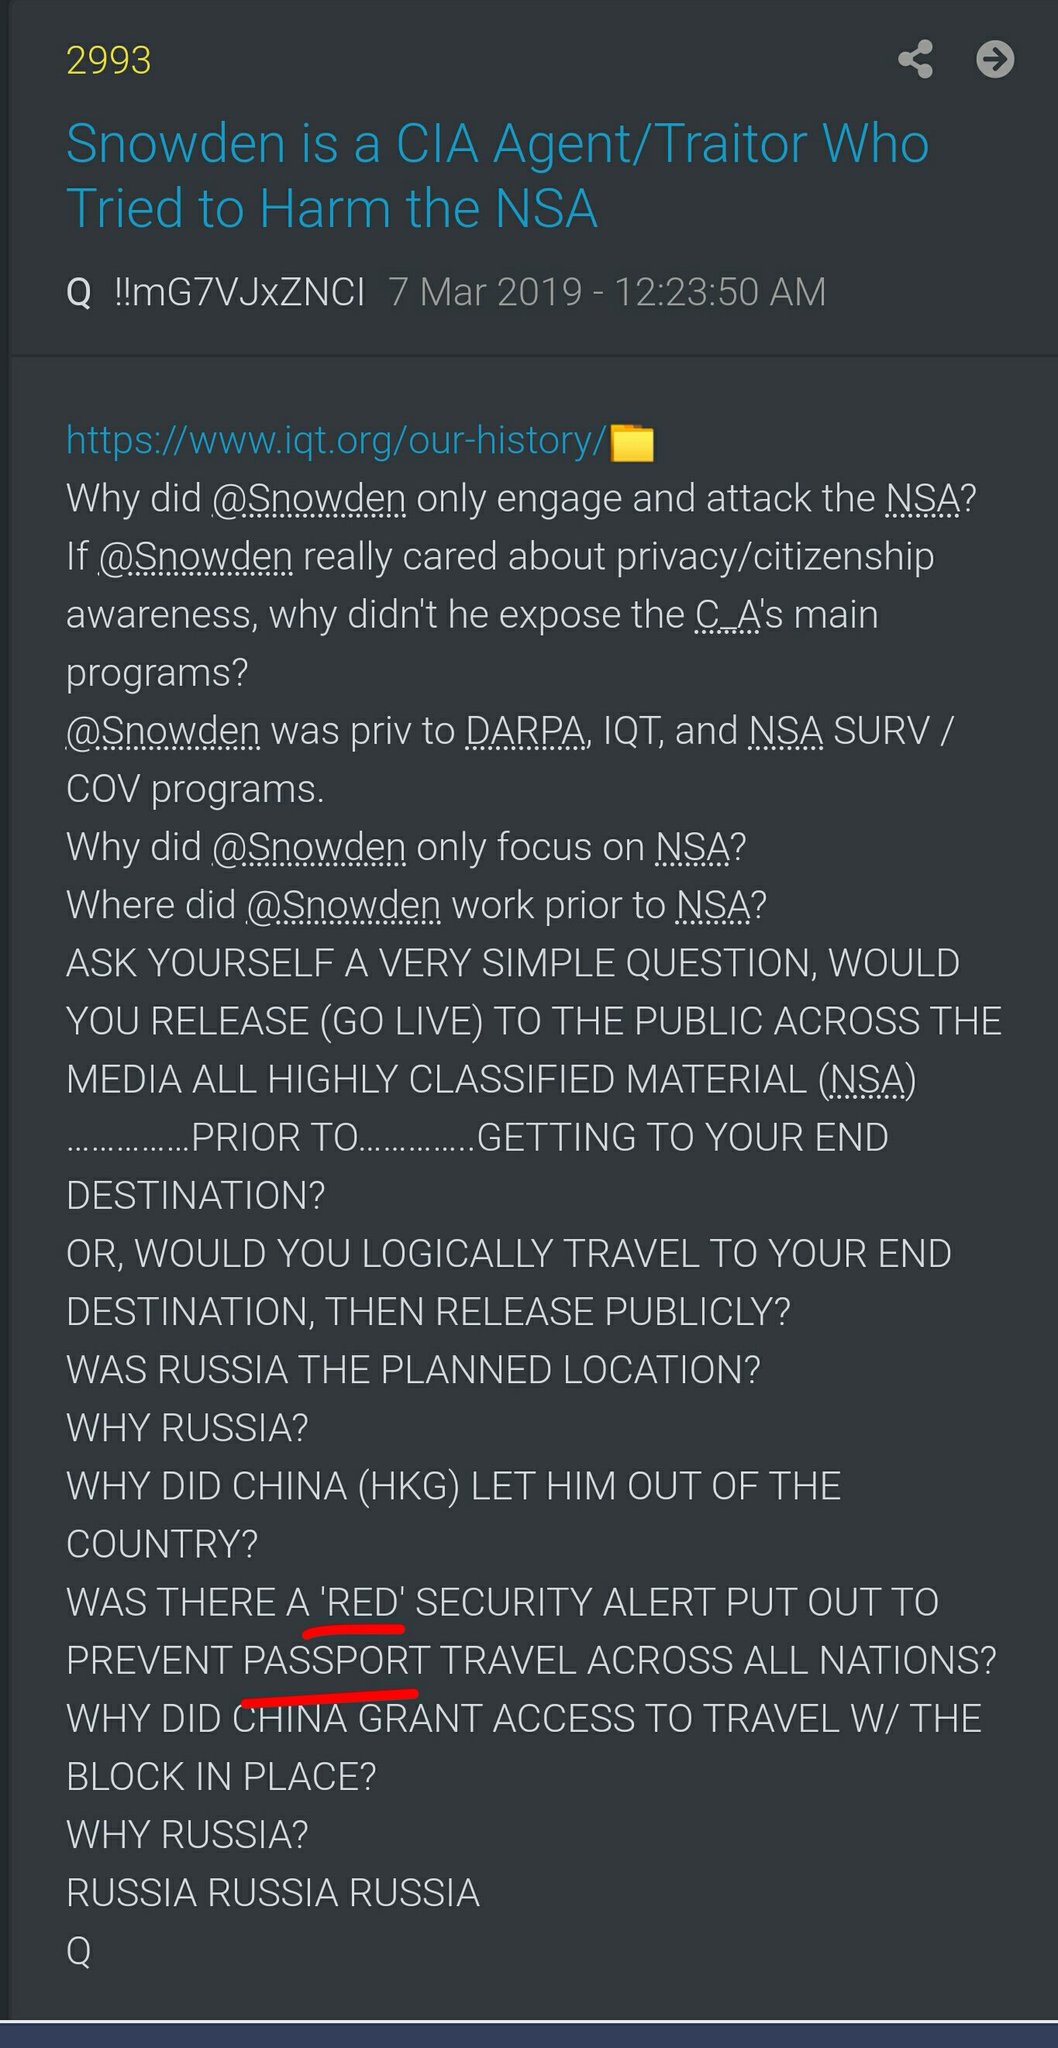 (((❌40Head❌⭐⭐⭐❌))) on Twitter: "Possible meaning of RIG FOR RED?Q stated passports can be flagged to limit travel. #QDrop 2993 used "'RED' SECURITY ALERT PUT OUT TO PREVENT PASSPORT TRAVEL"Drop 1 we saw HRC's"Passport approved to be flagged..."Does RIG FOR RED mean it's time to flag passports?#WWG1WGA… https://t.co/pcwaJuK0Nw"